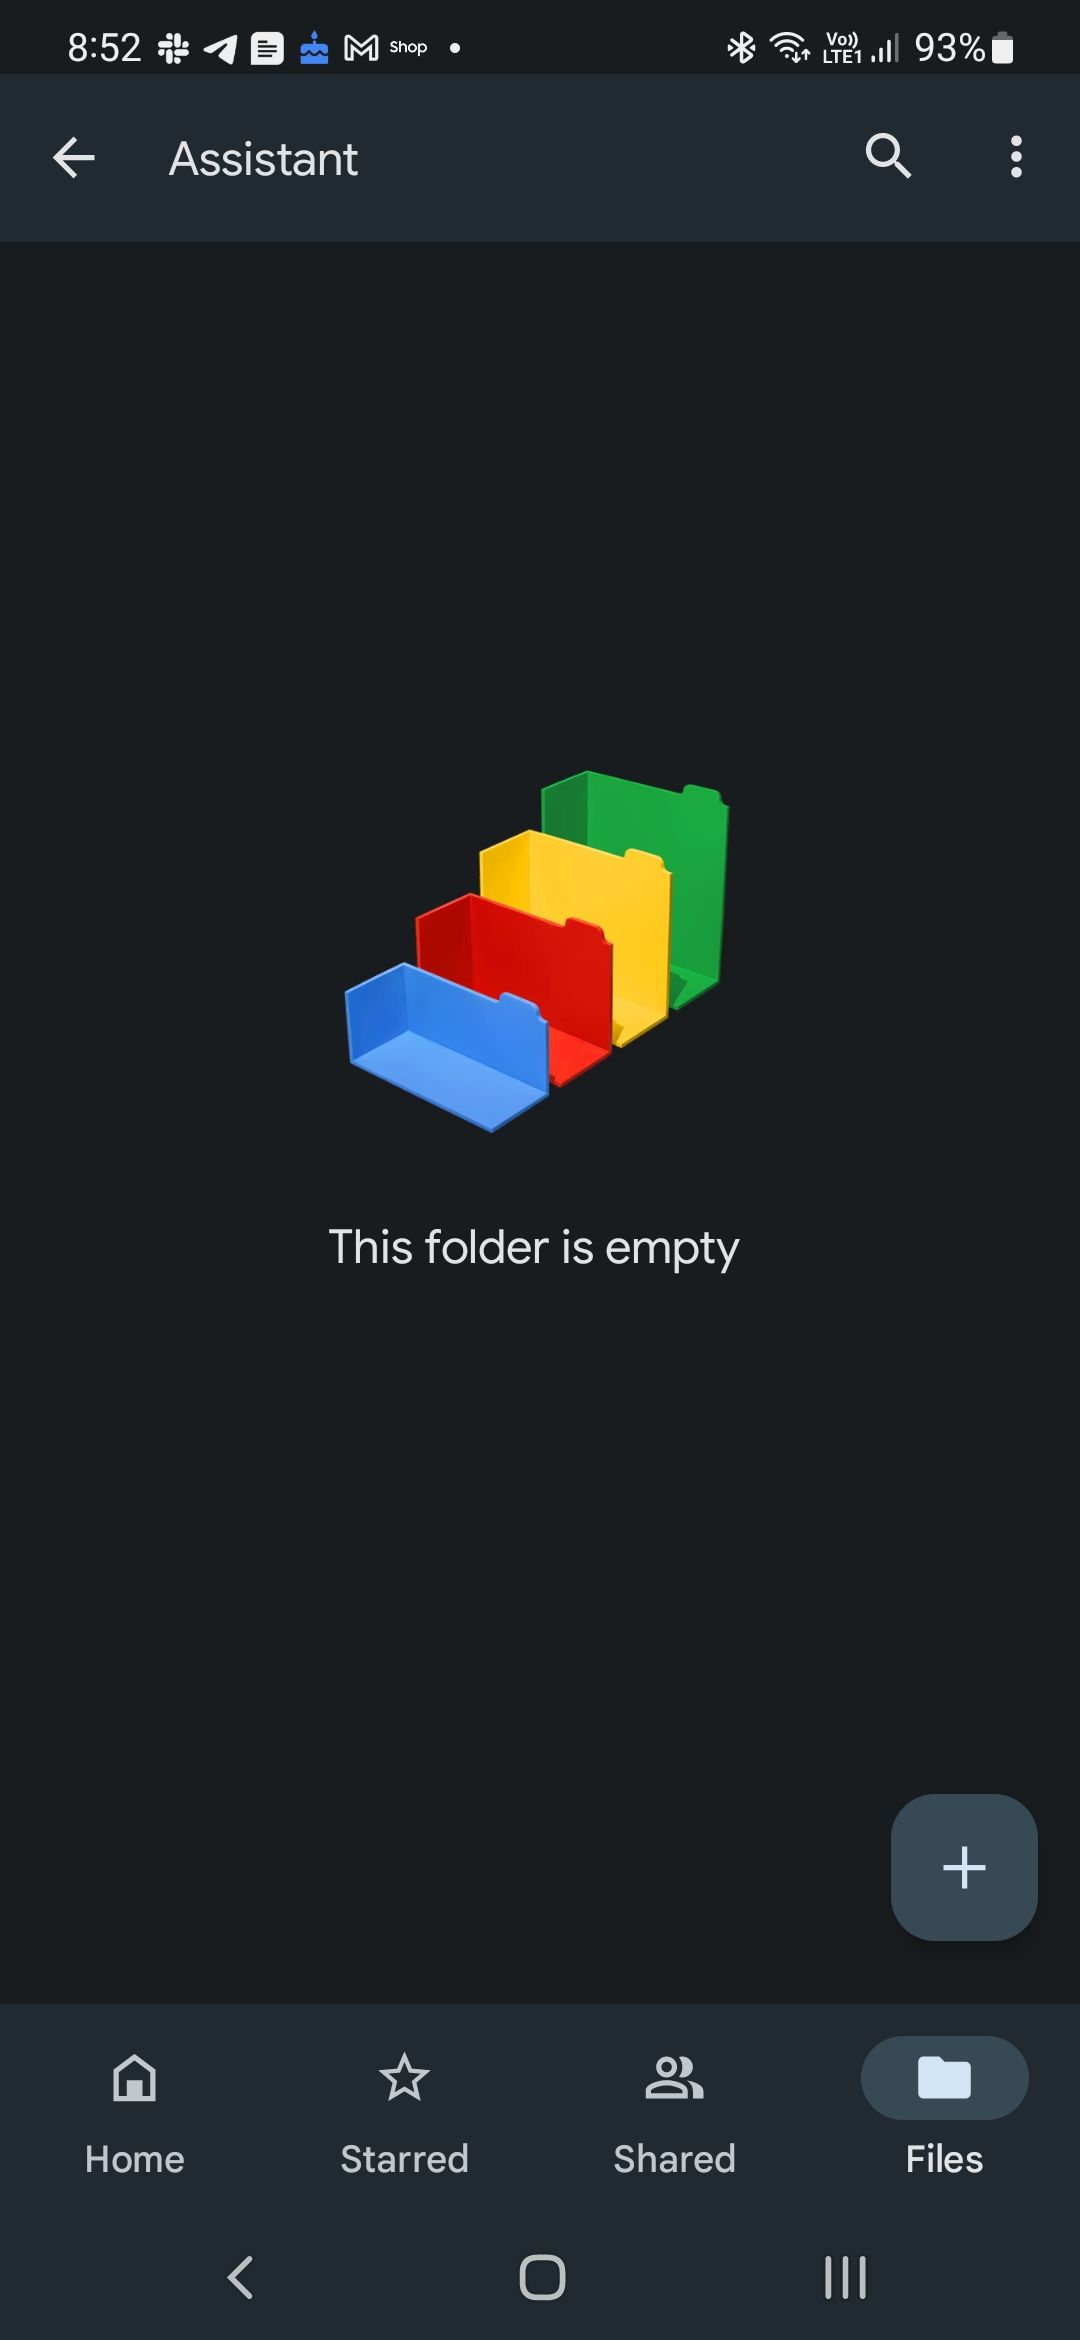 Mobile screenshot of an empty Google Drive folder titled 'Assistant' with a colorful 3D file icon graphic and the message 'This folder is empty'.